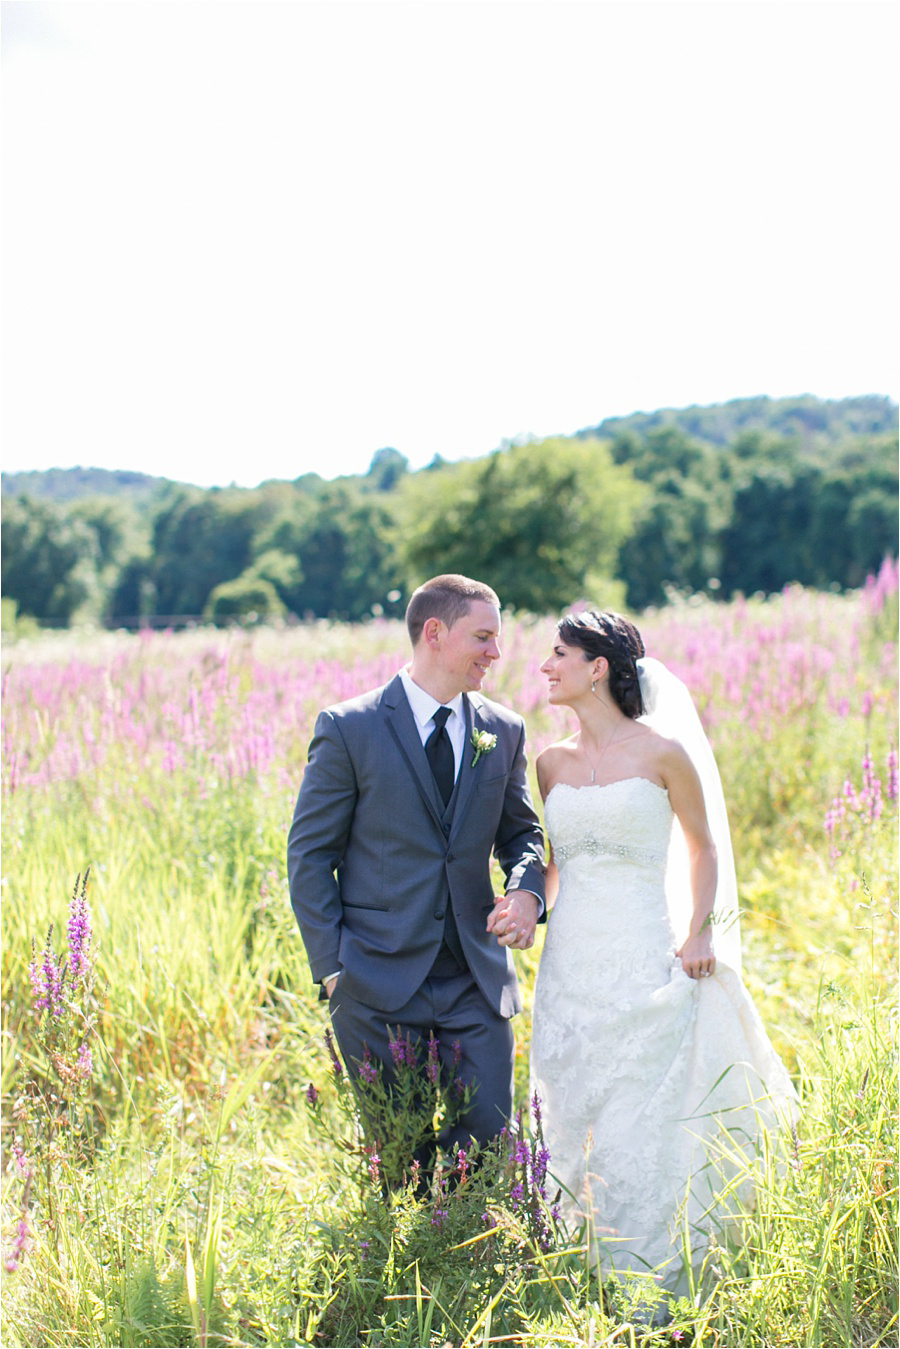 Red Maple Vineyard Wedding Photos - Amy Rizzuto Photography-29